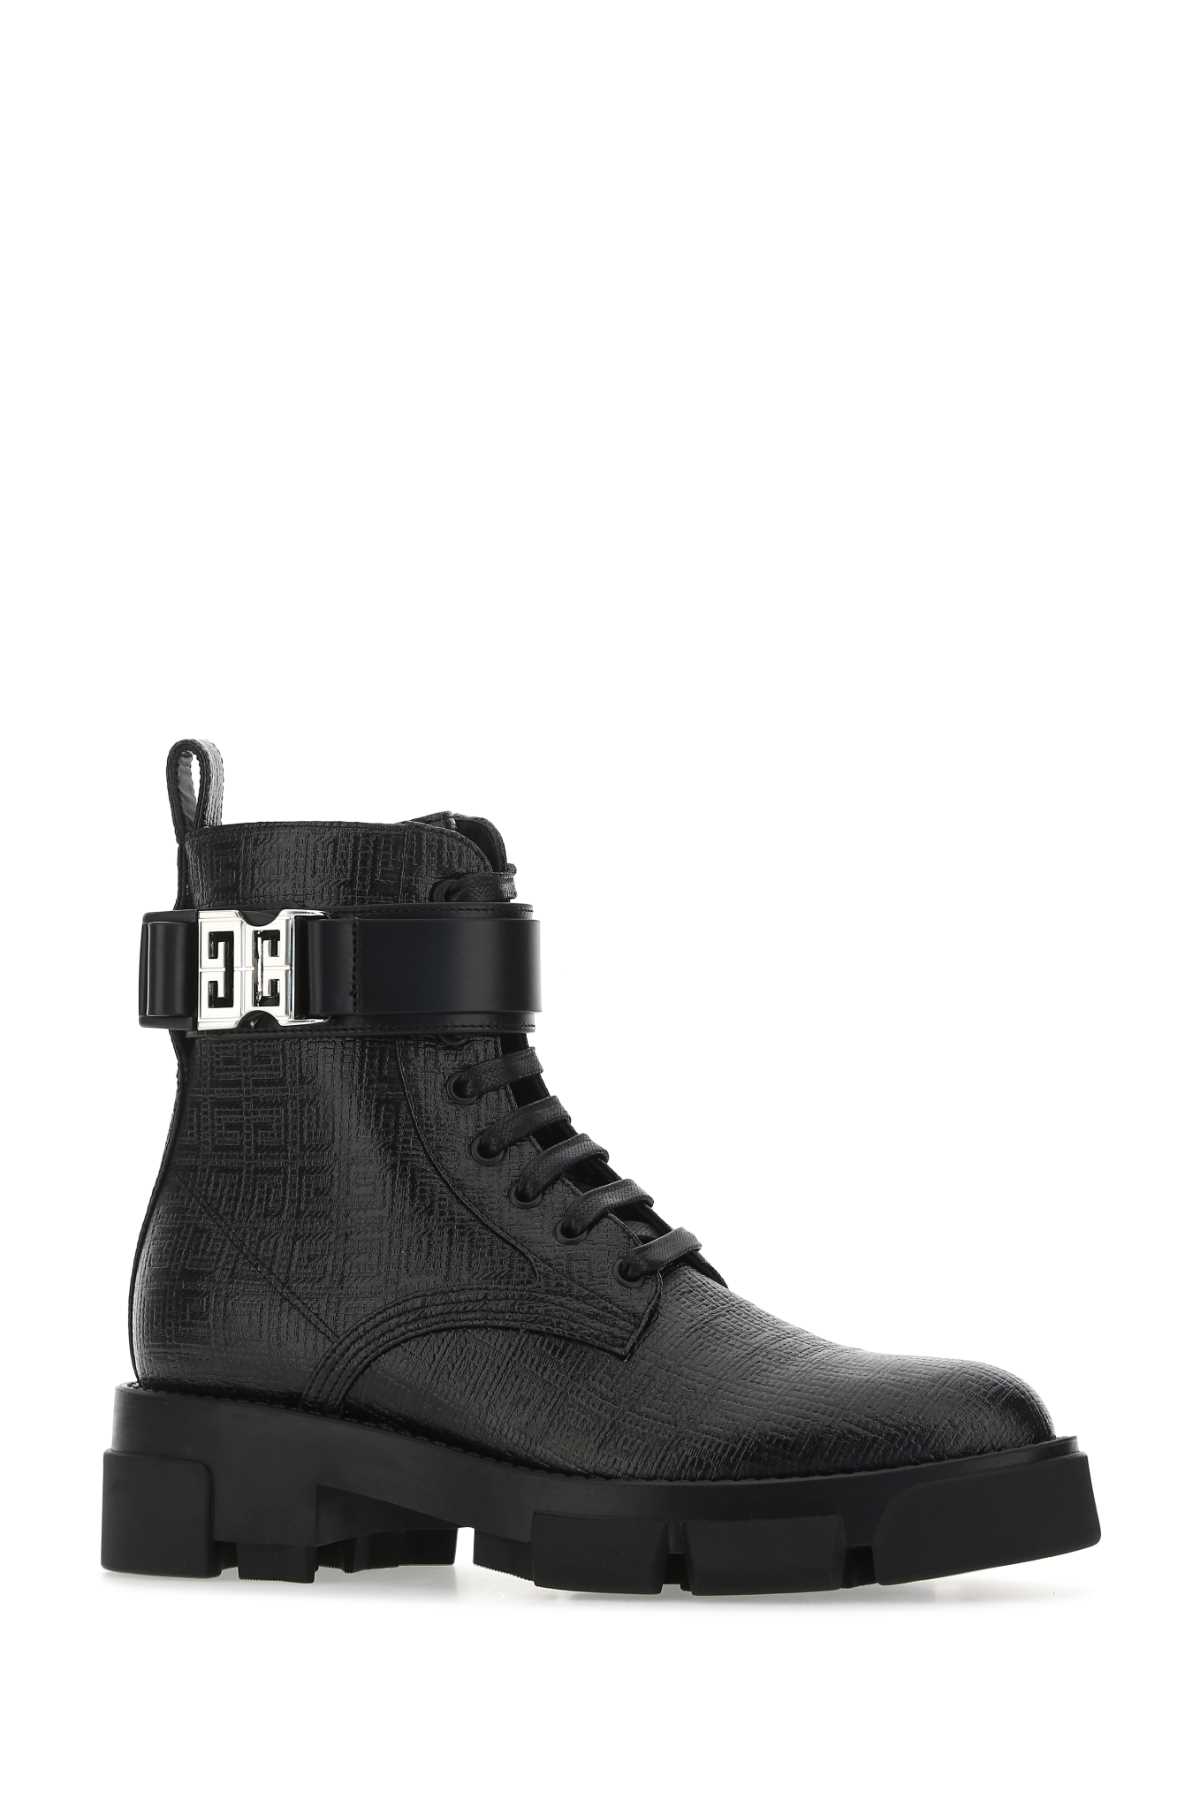 GIVENCHY BLACK LEATHER TERRA ANKLE BOOTS